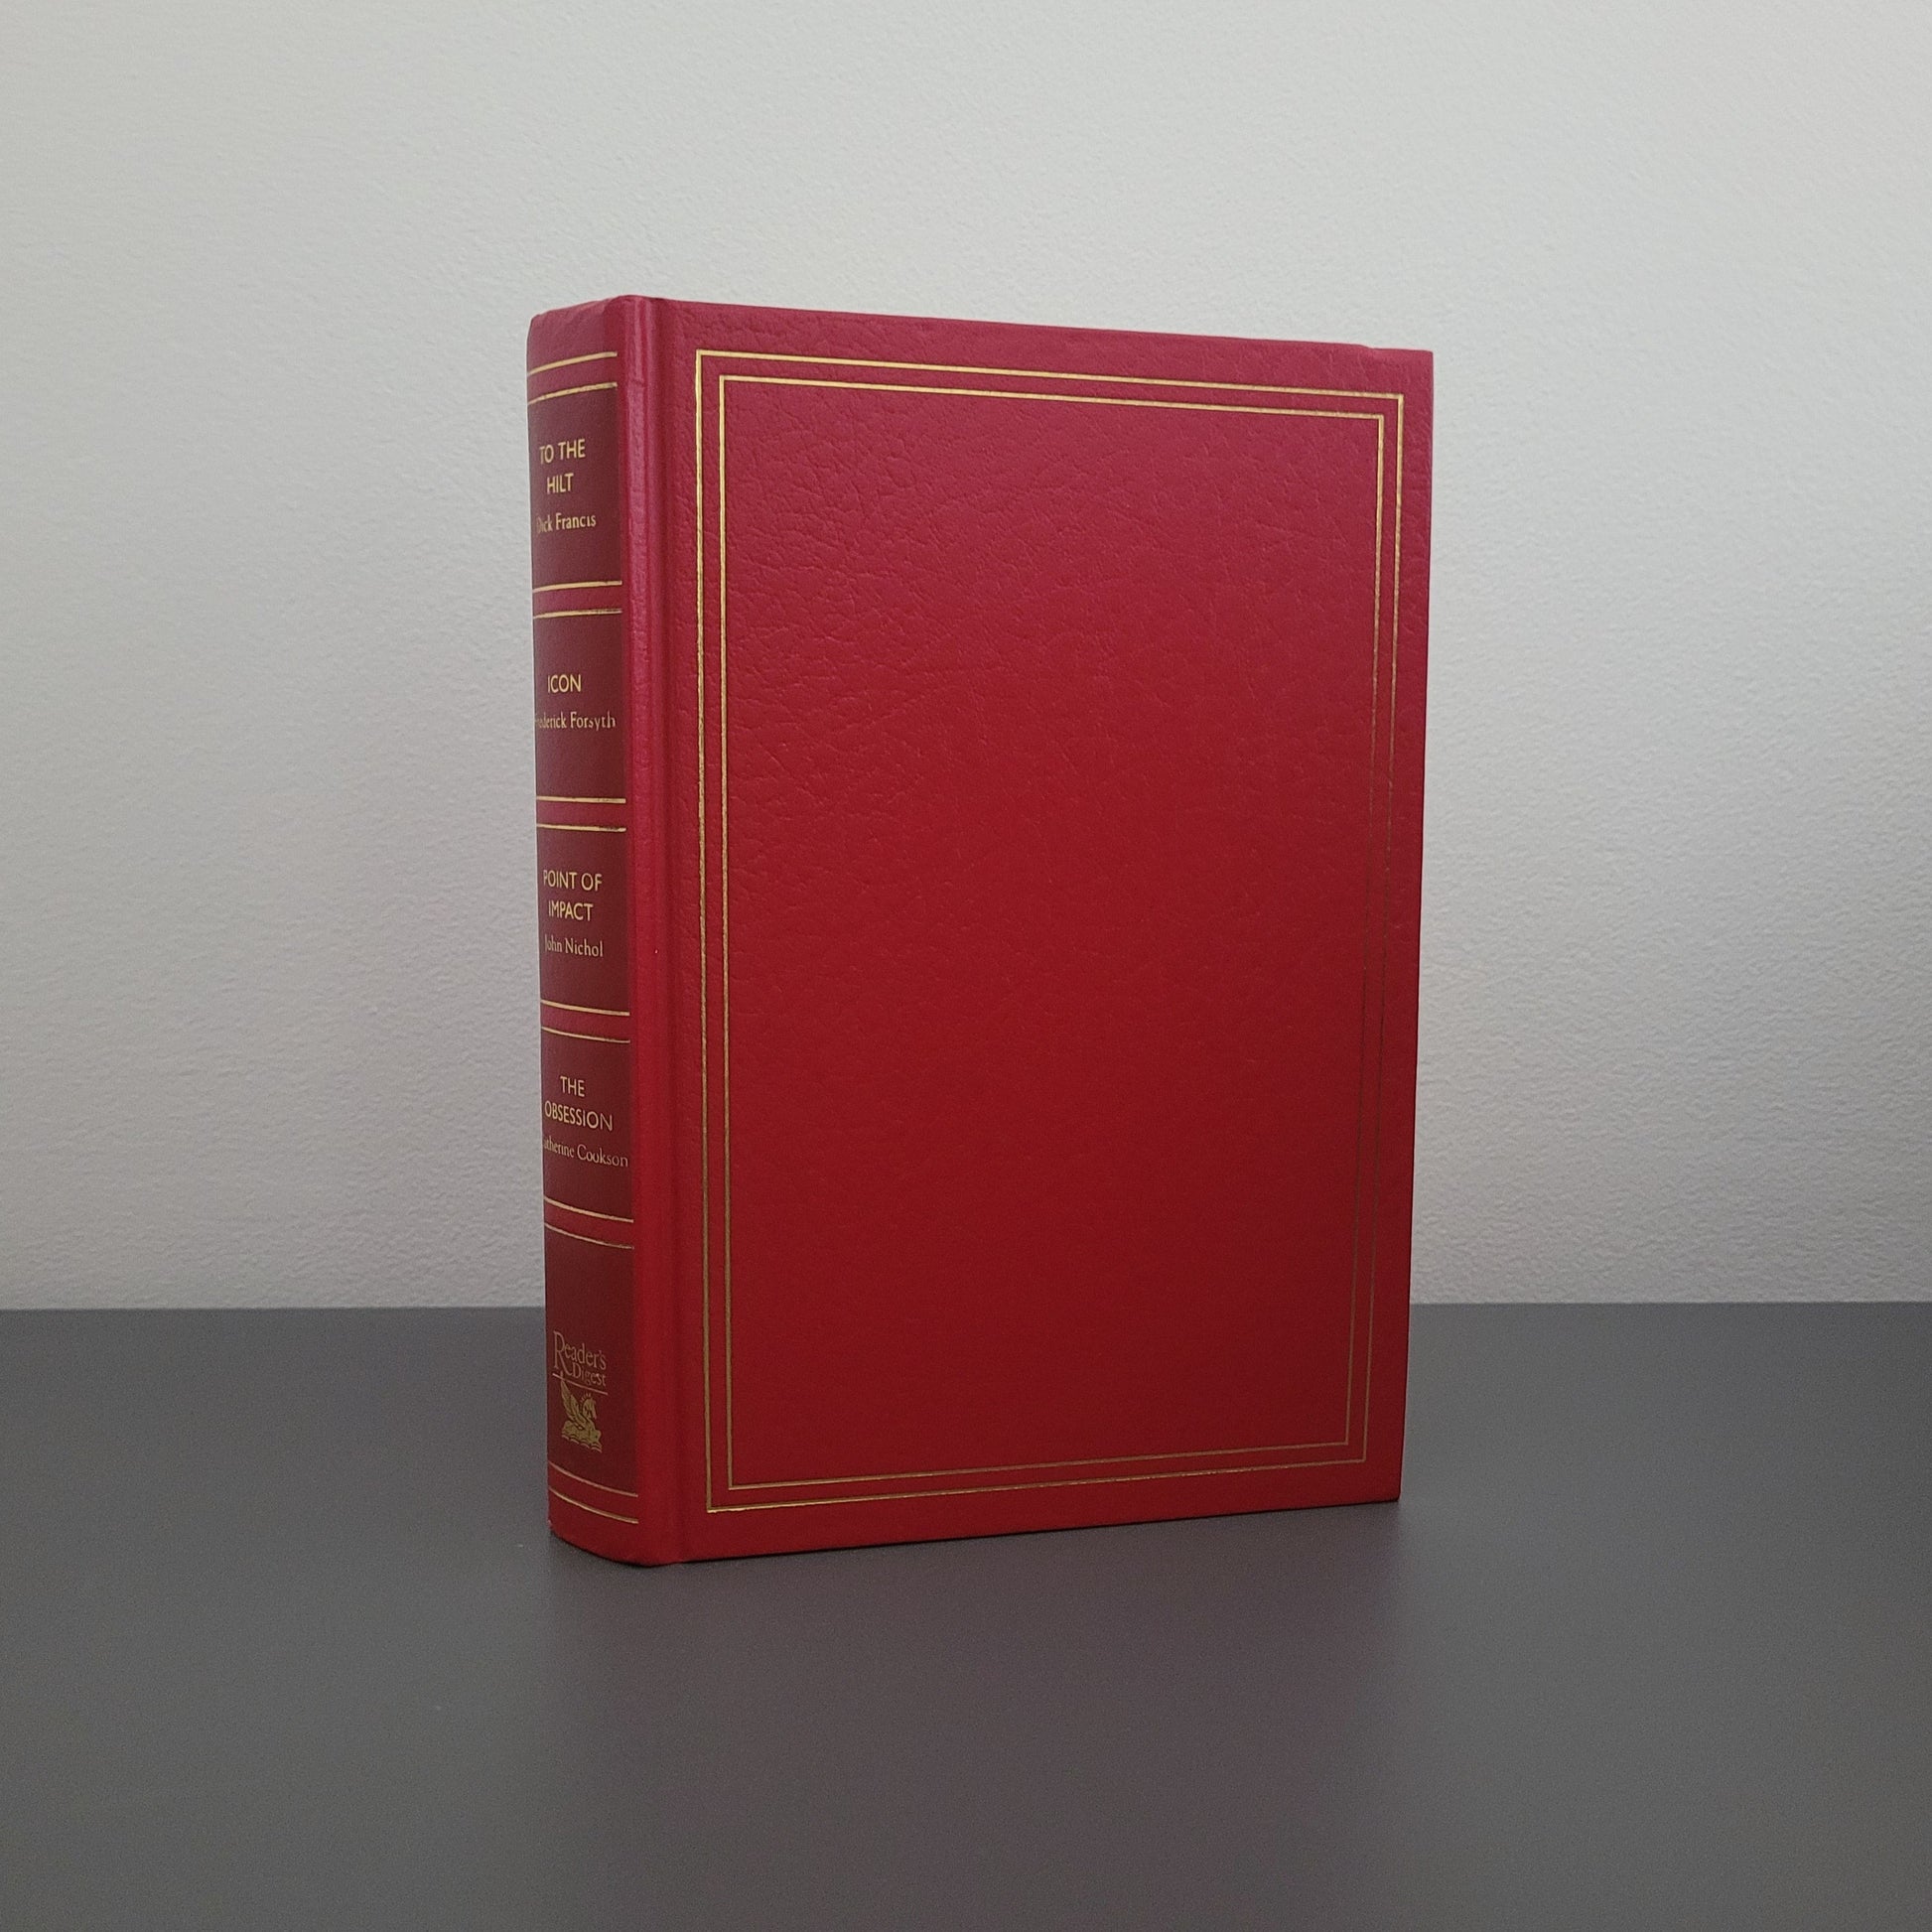 A picture of the front of the book fold - a red hardback book with a gold border